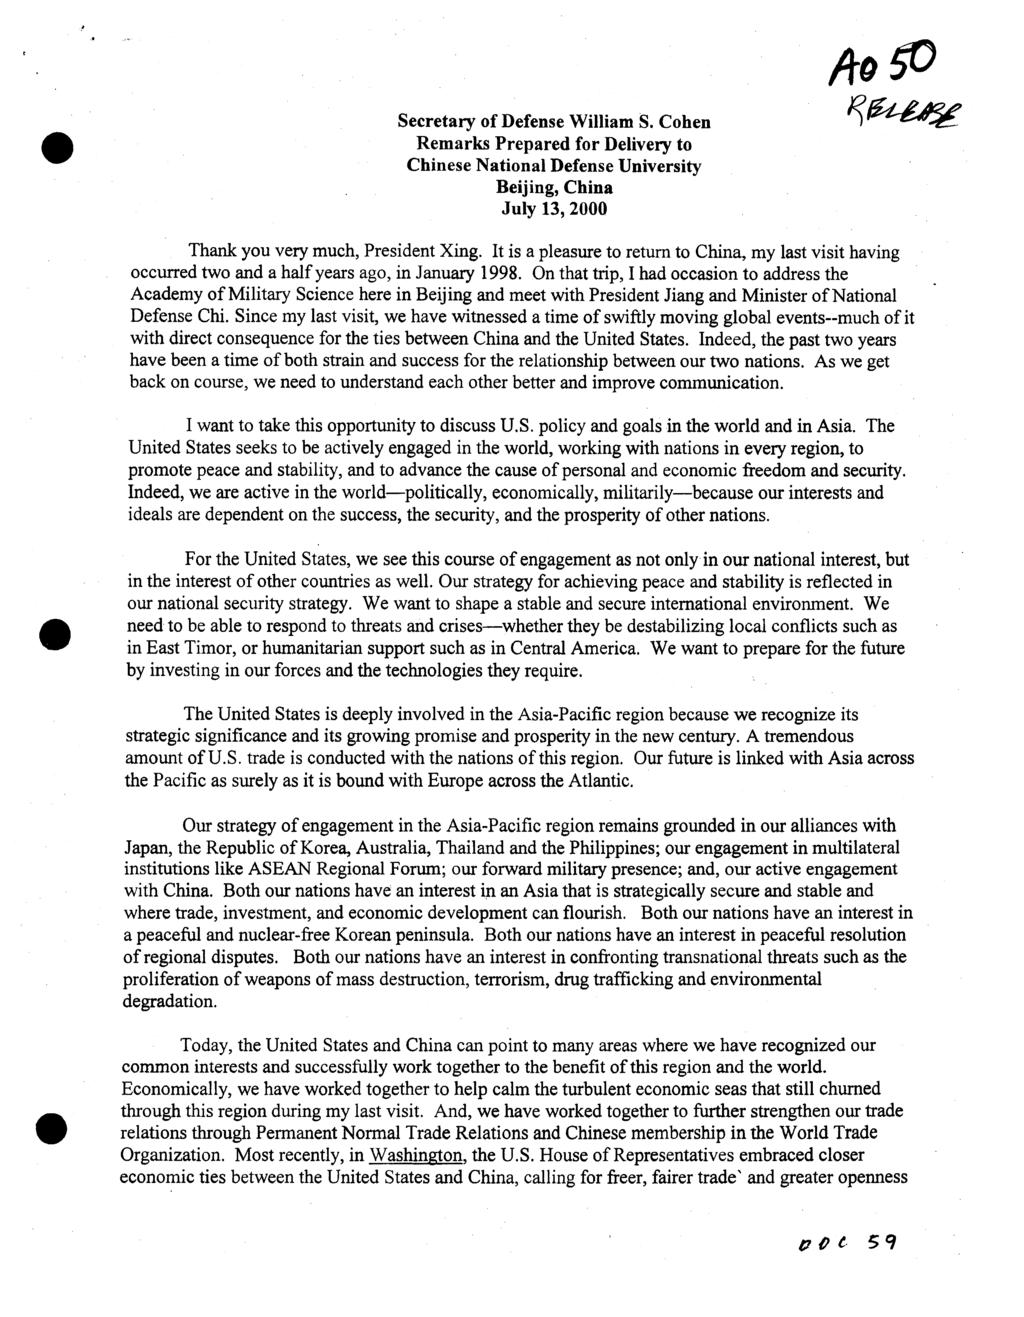 Secretary of Defense William S. Cohen Remarks Prepared for Delivery to Chinese National Defense University Beij ing, China July 13,2000 Thank you very much, President Xing.